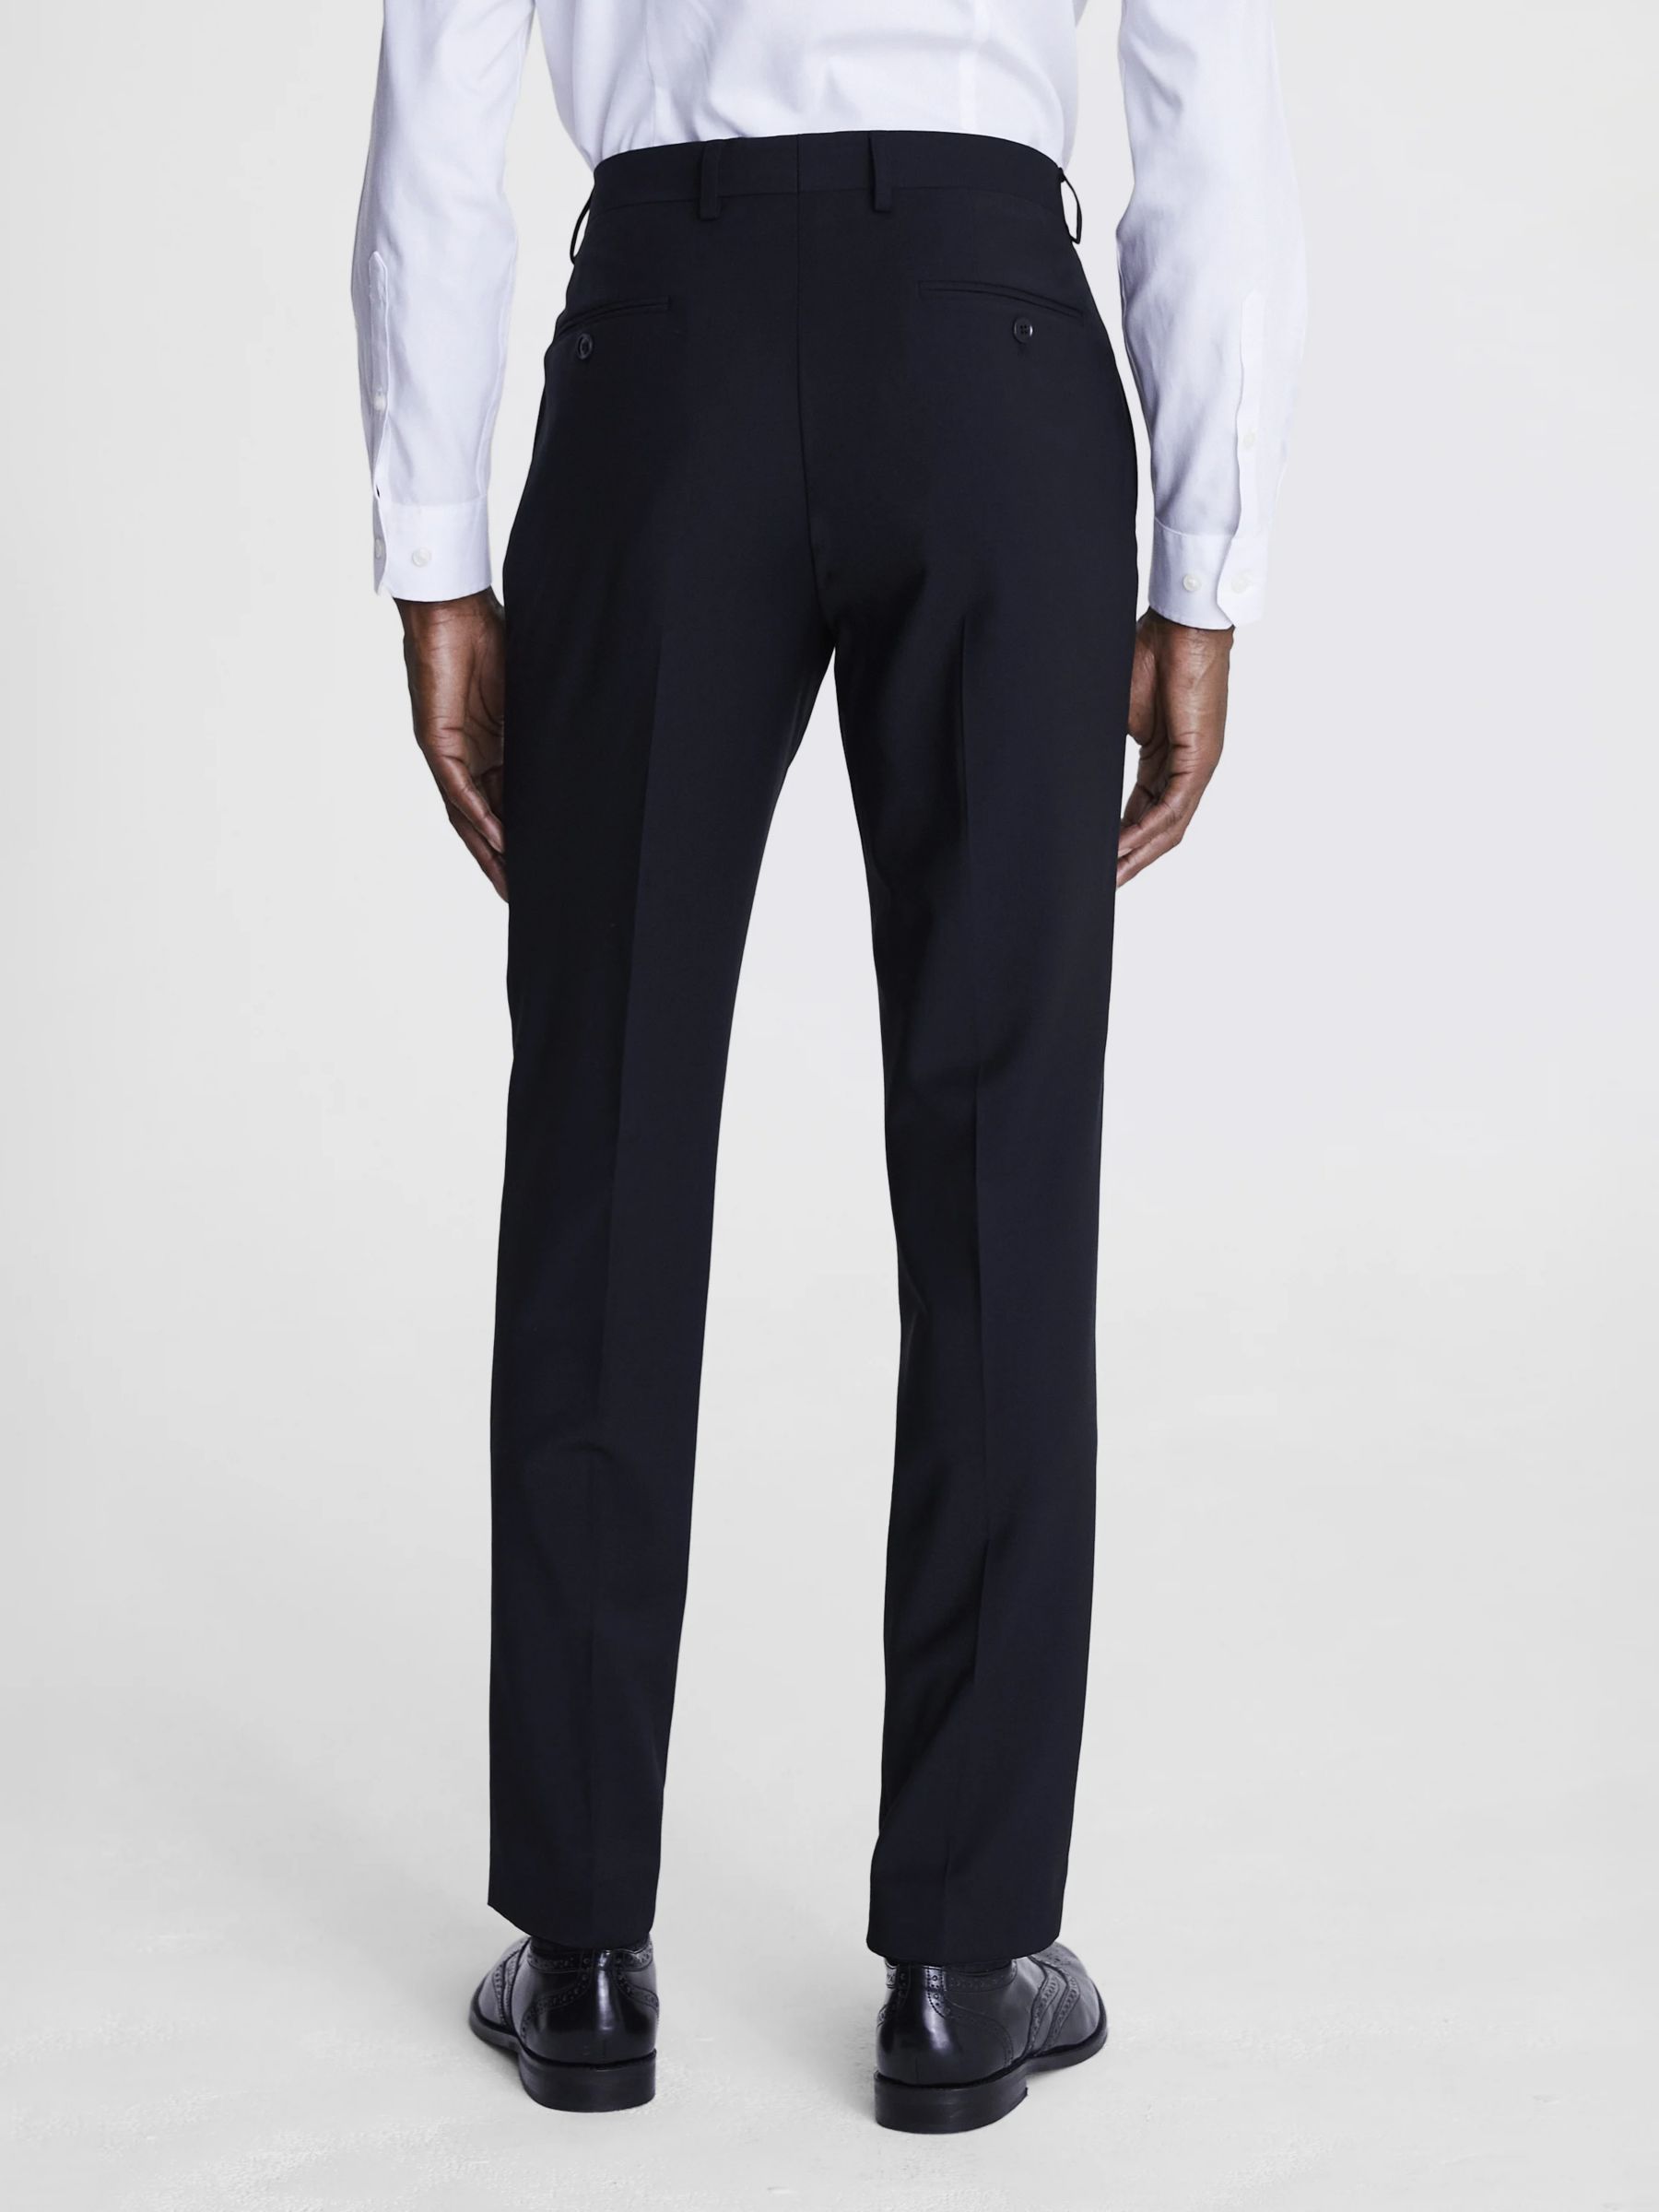 Buy Moss Performance Tailored Fit Suit Trousers, Black Online at johnlewis.com